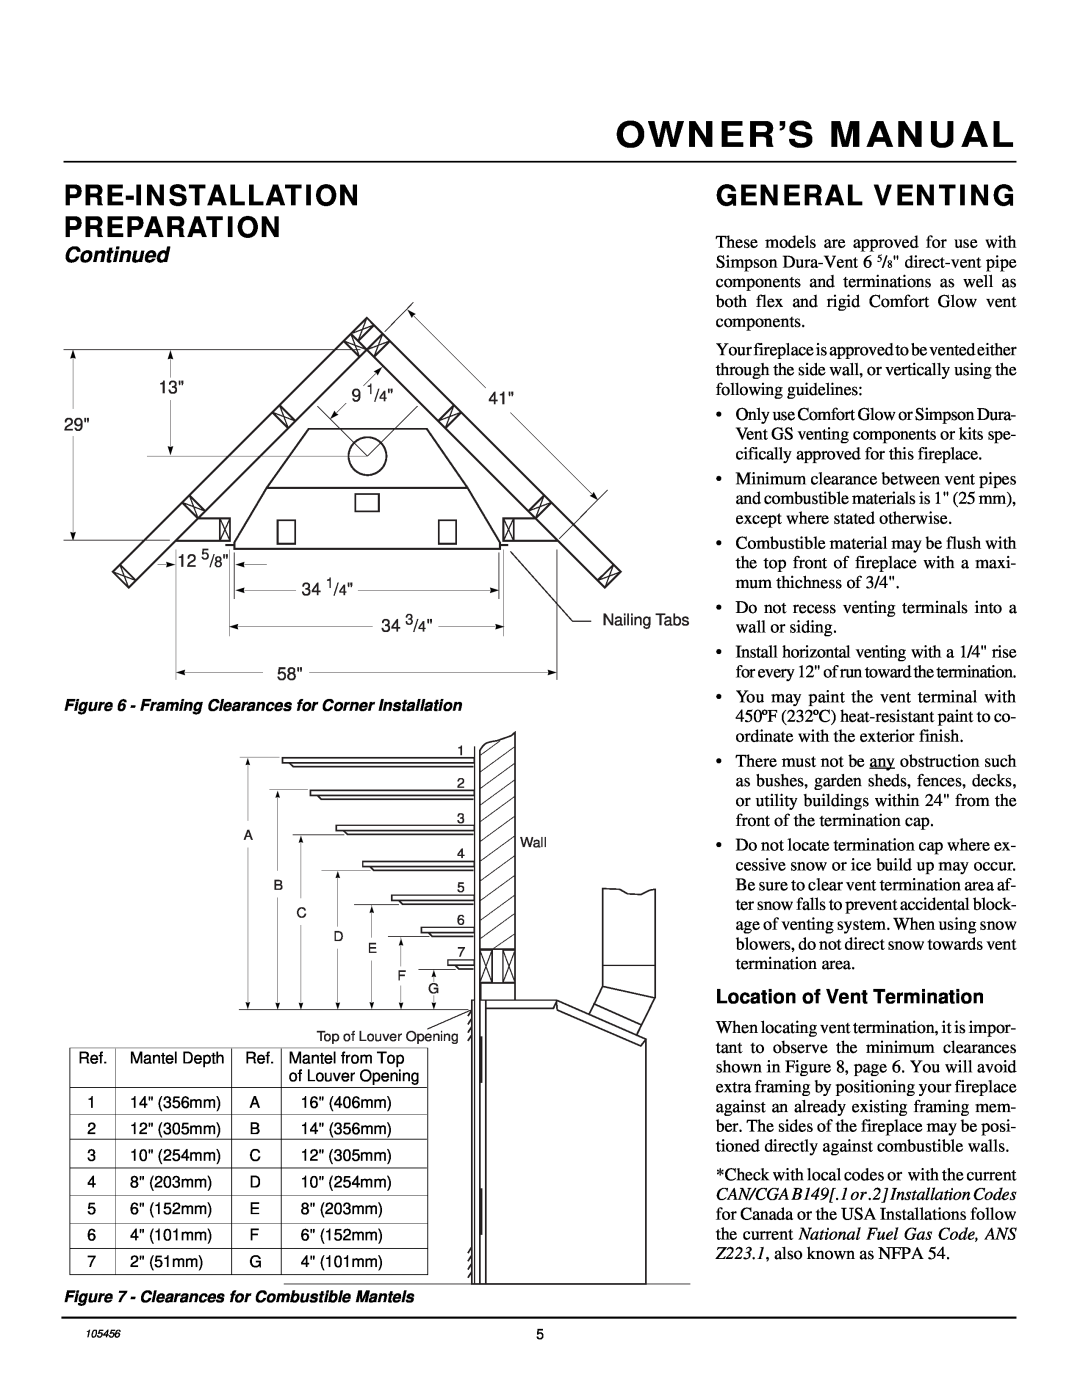 Desa CHDV34(N/P)(A) Pre-Installation Preparation, General Venting, Continued, Location of Vent Termination, Owner’S Manual 